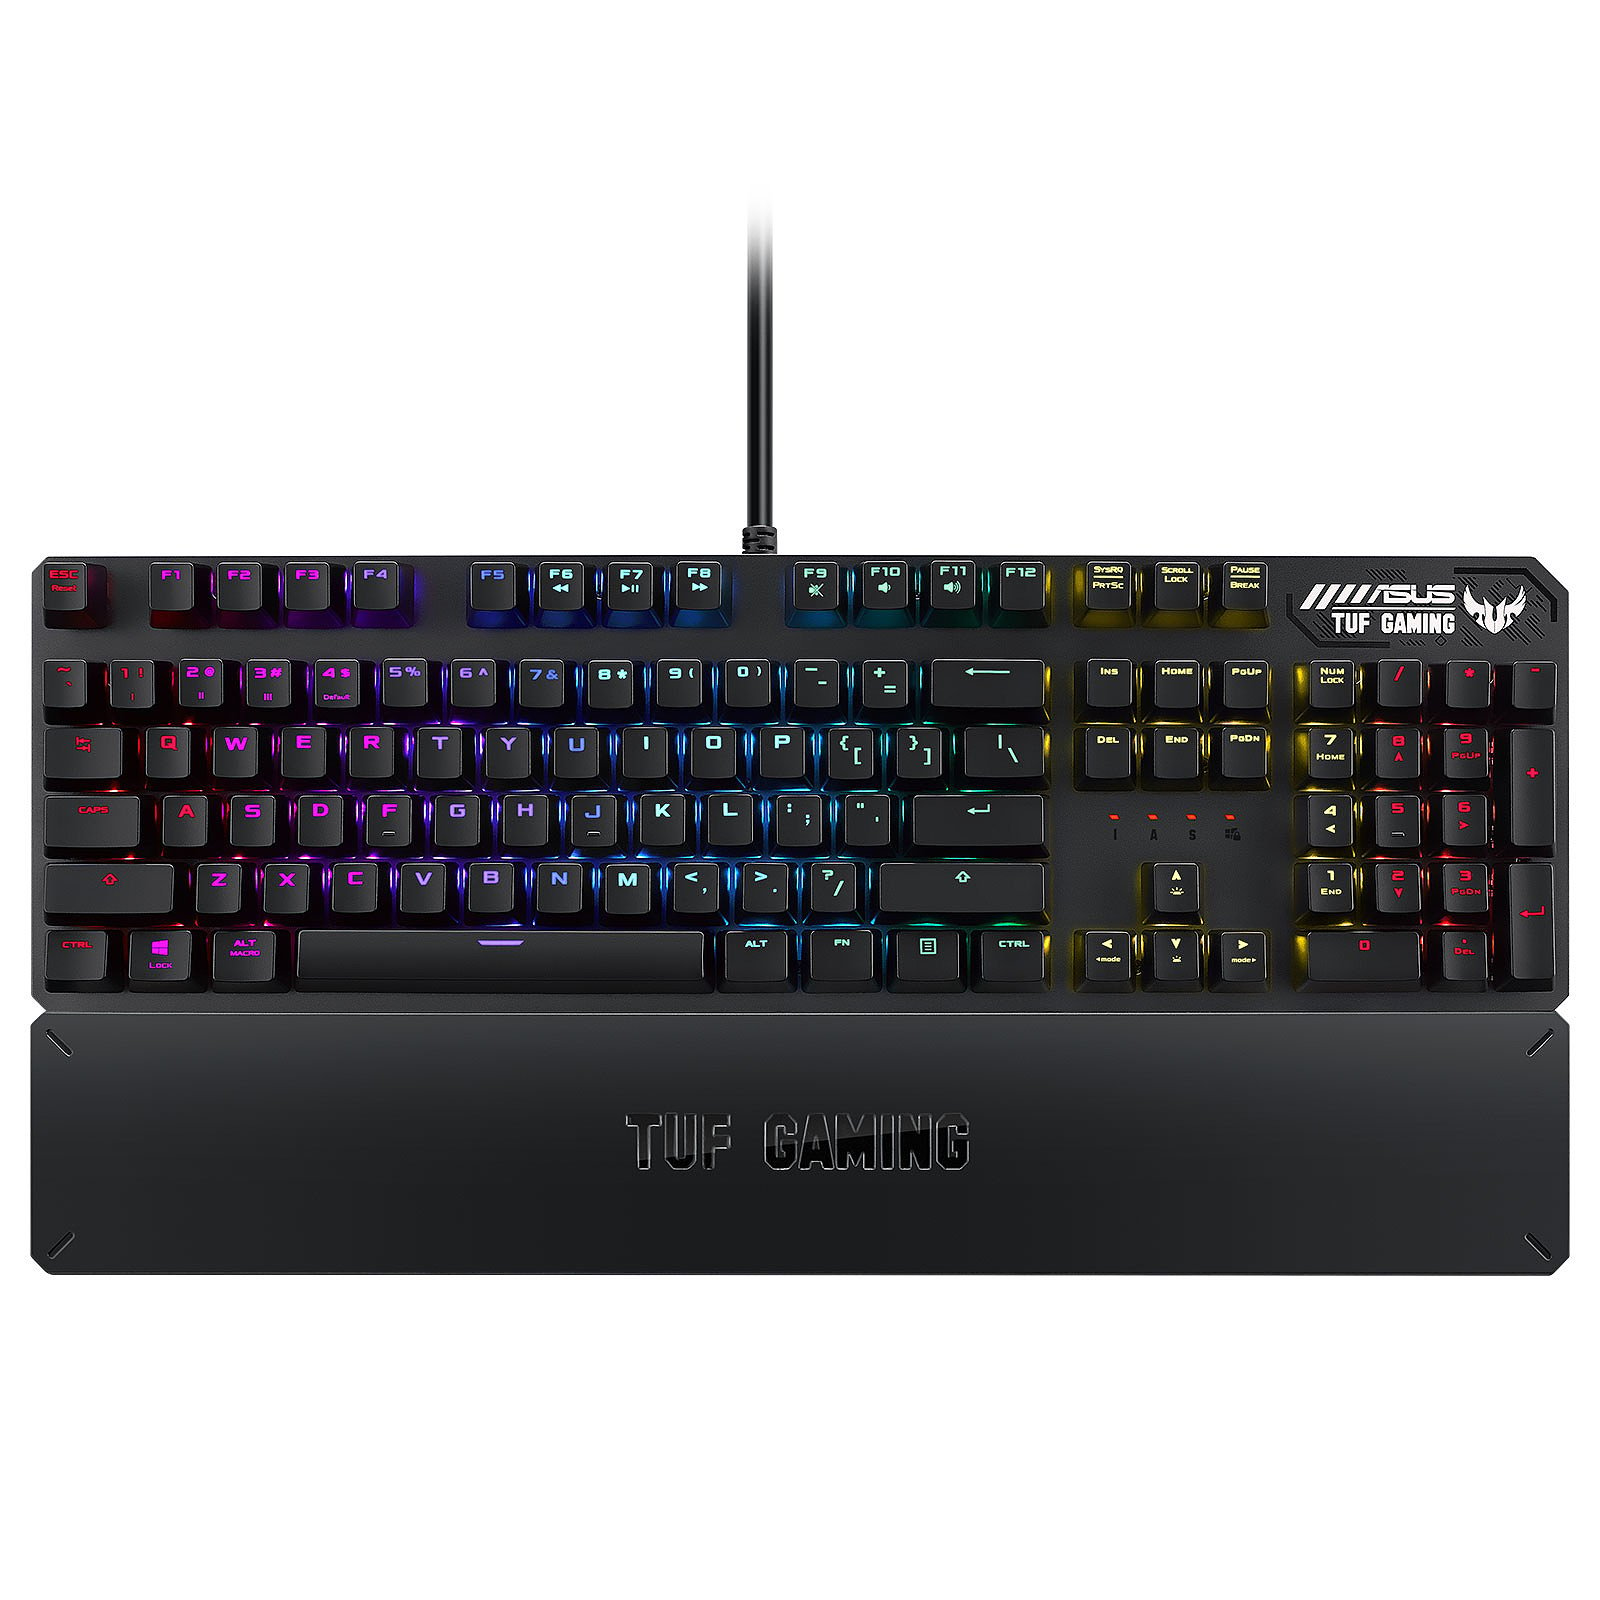 Clavier PC Gamer - Le guide d'achat